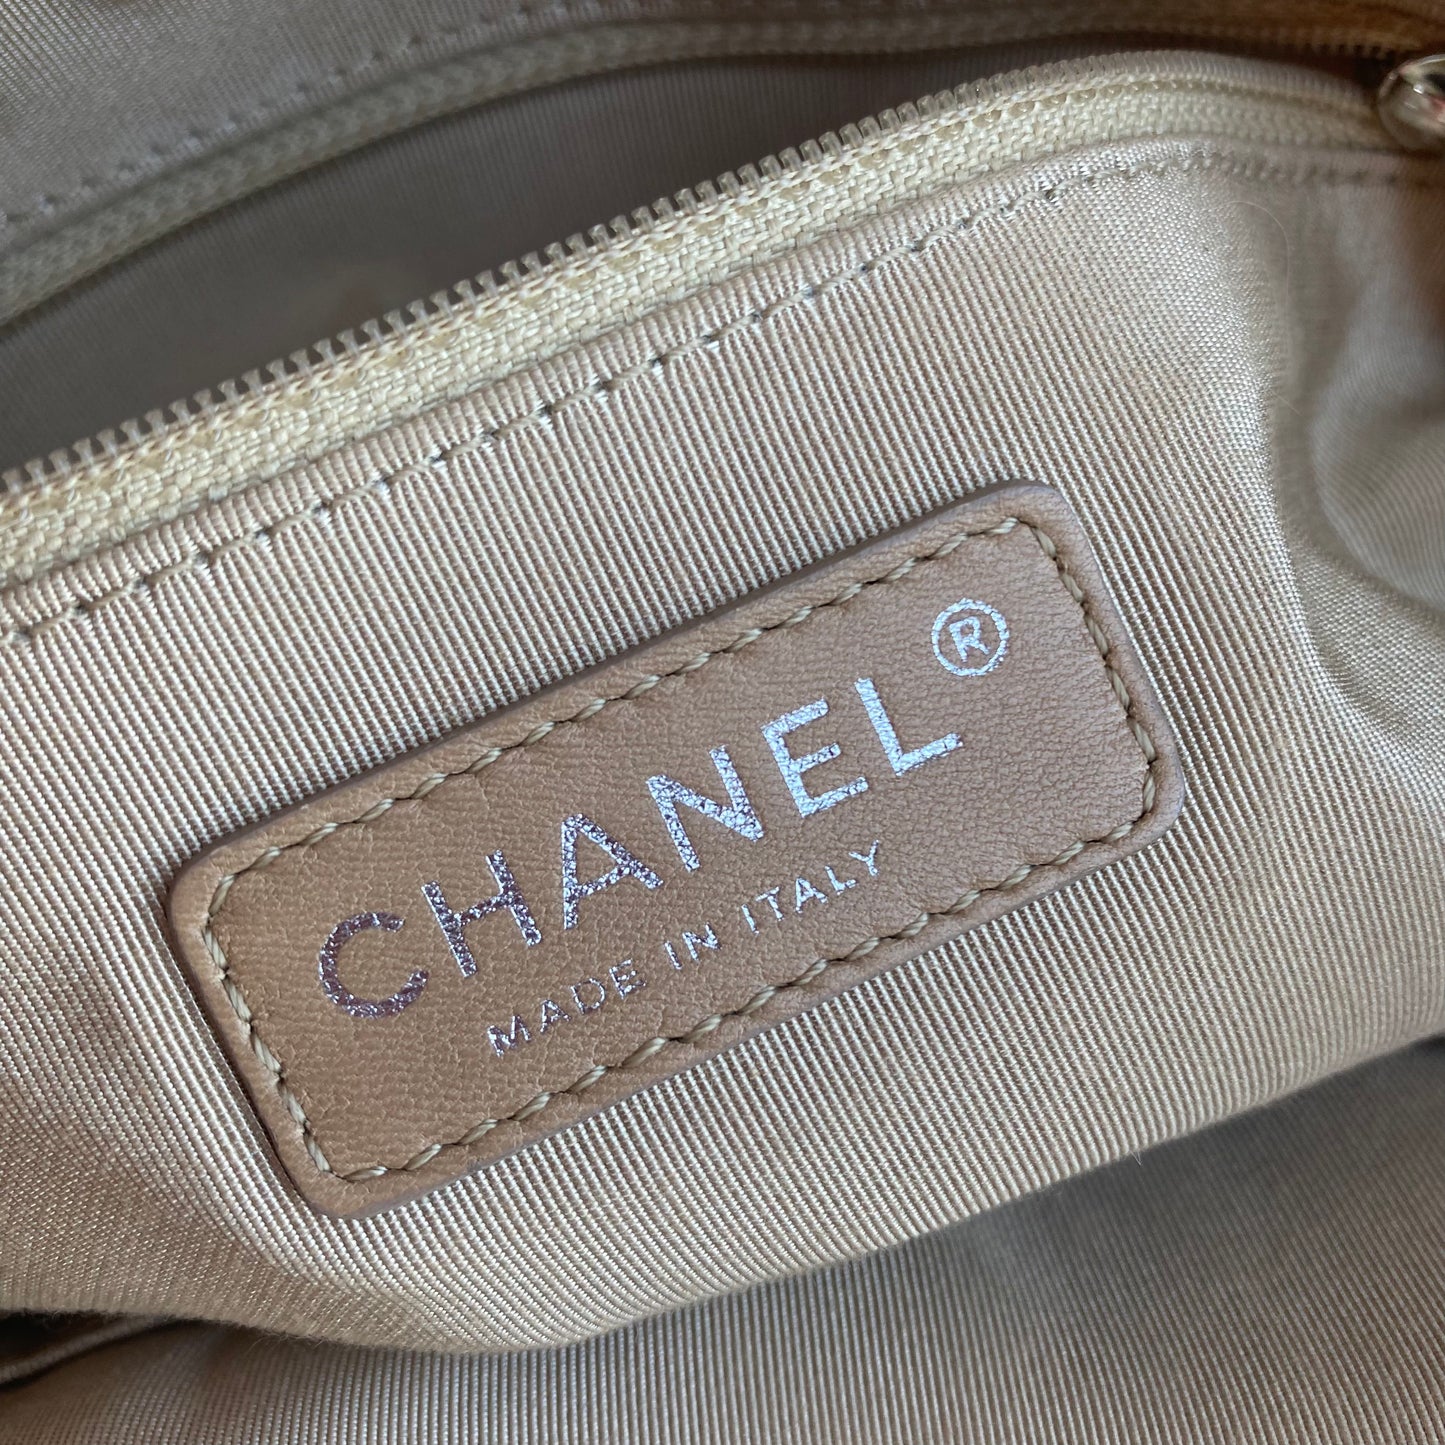 Chanel Timeless CC Expandable Quilted Tote